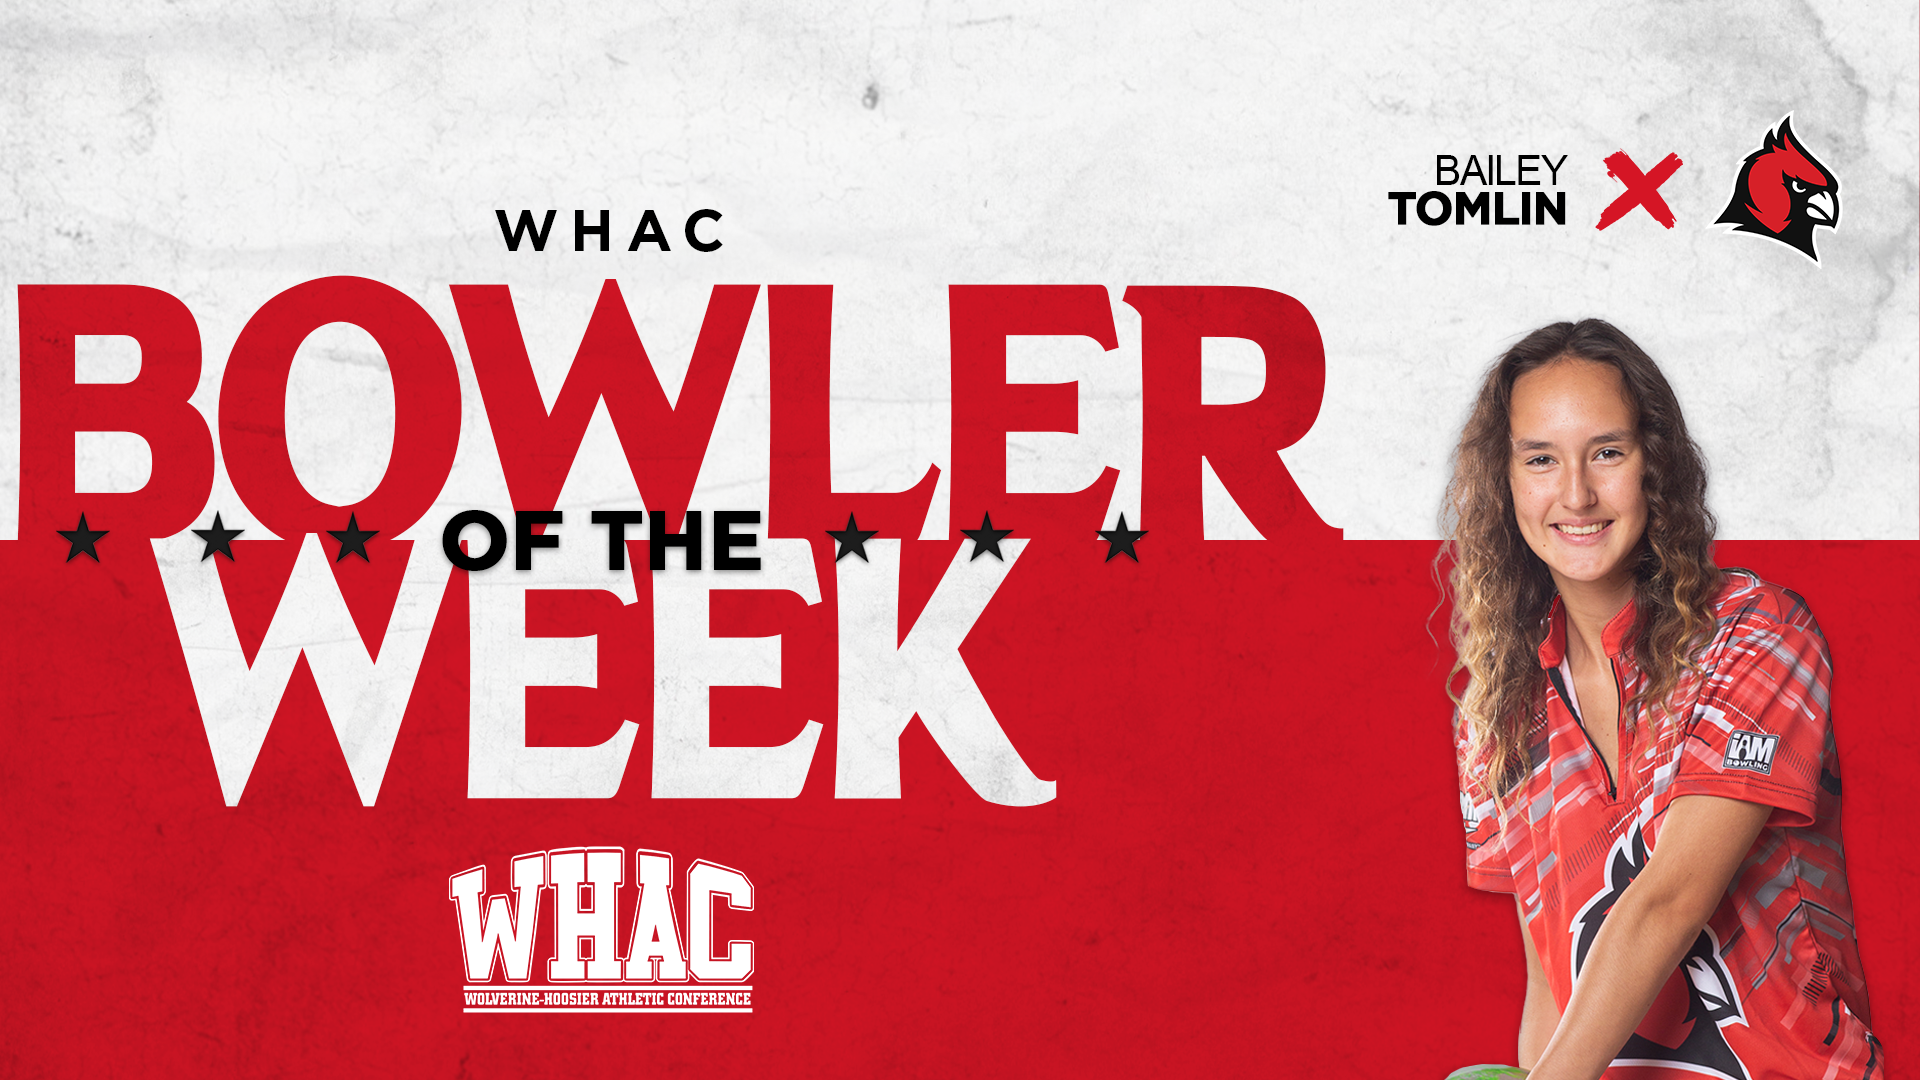 Tomlin takes home WHAC Bowler of the Week